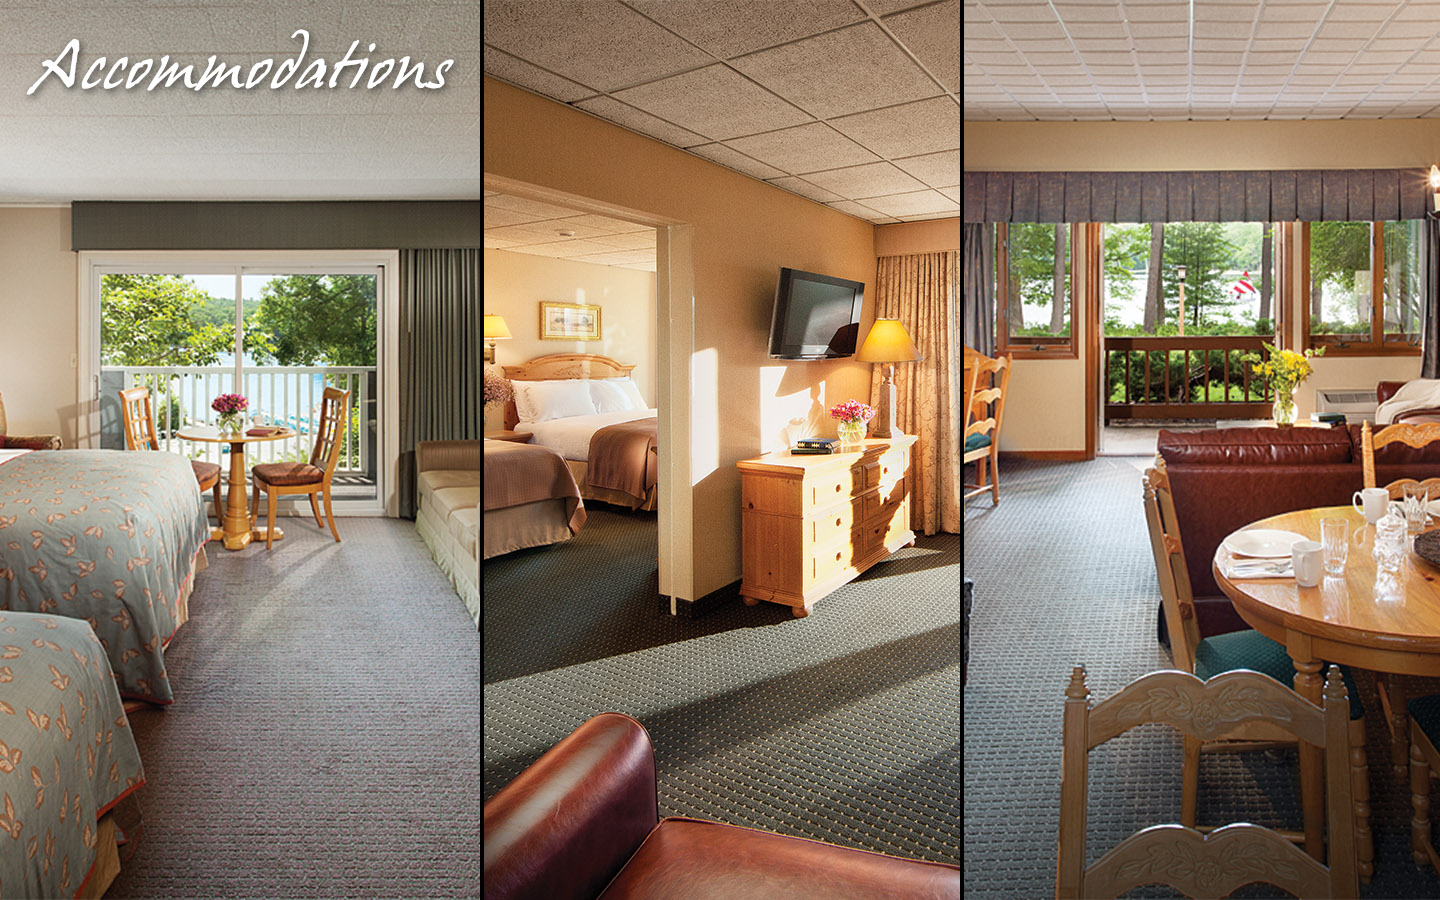 Three photos: guest bedroom, guest bedroom and living room, guest living room. text: Accommodations.